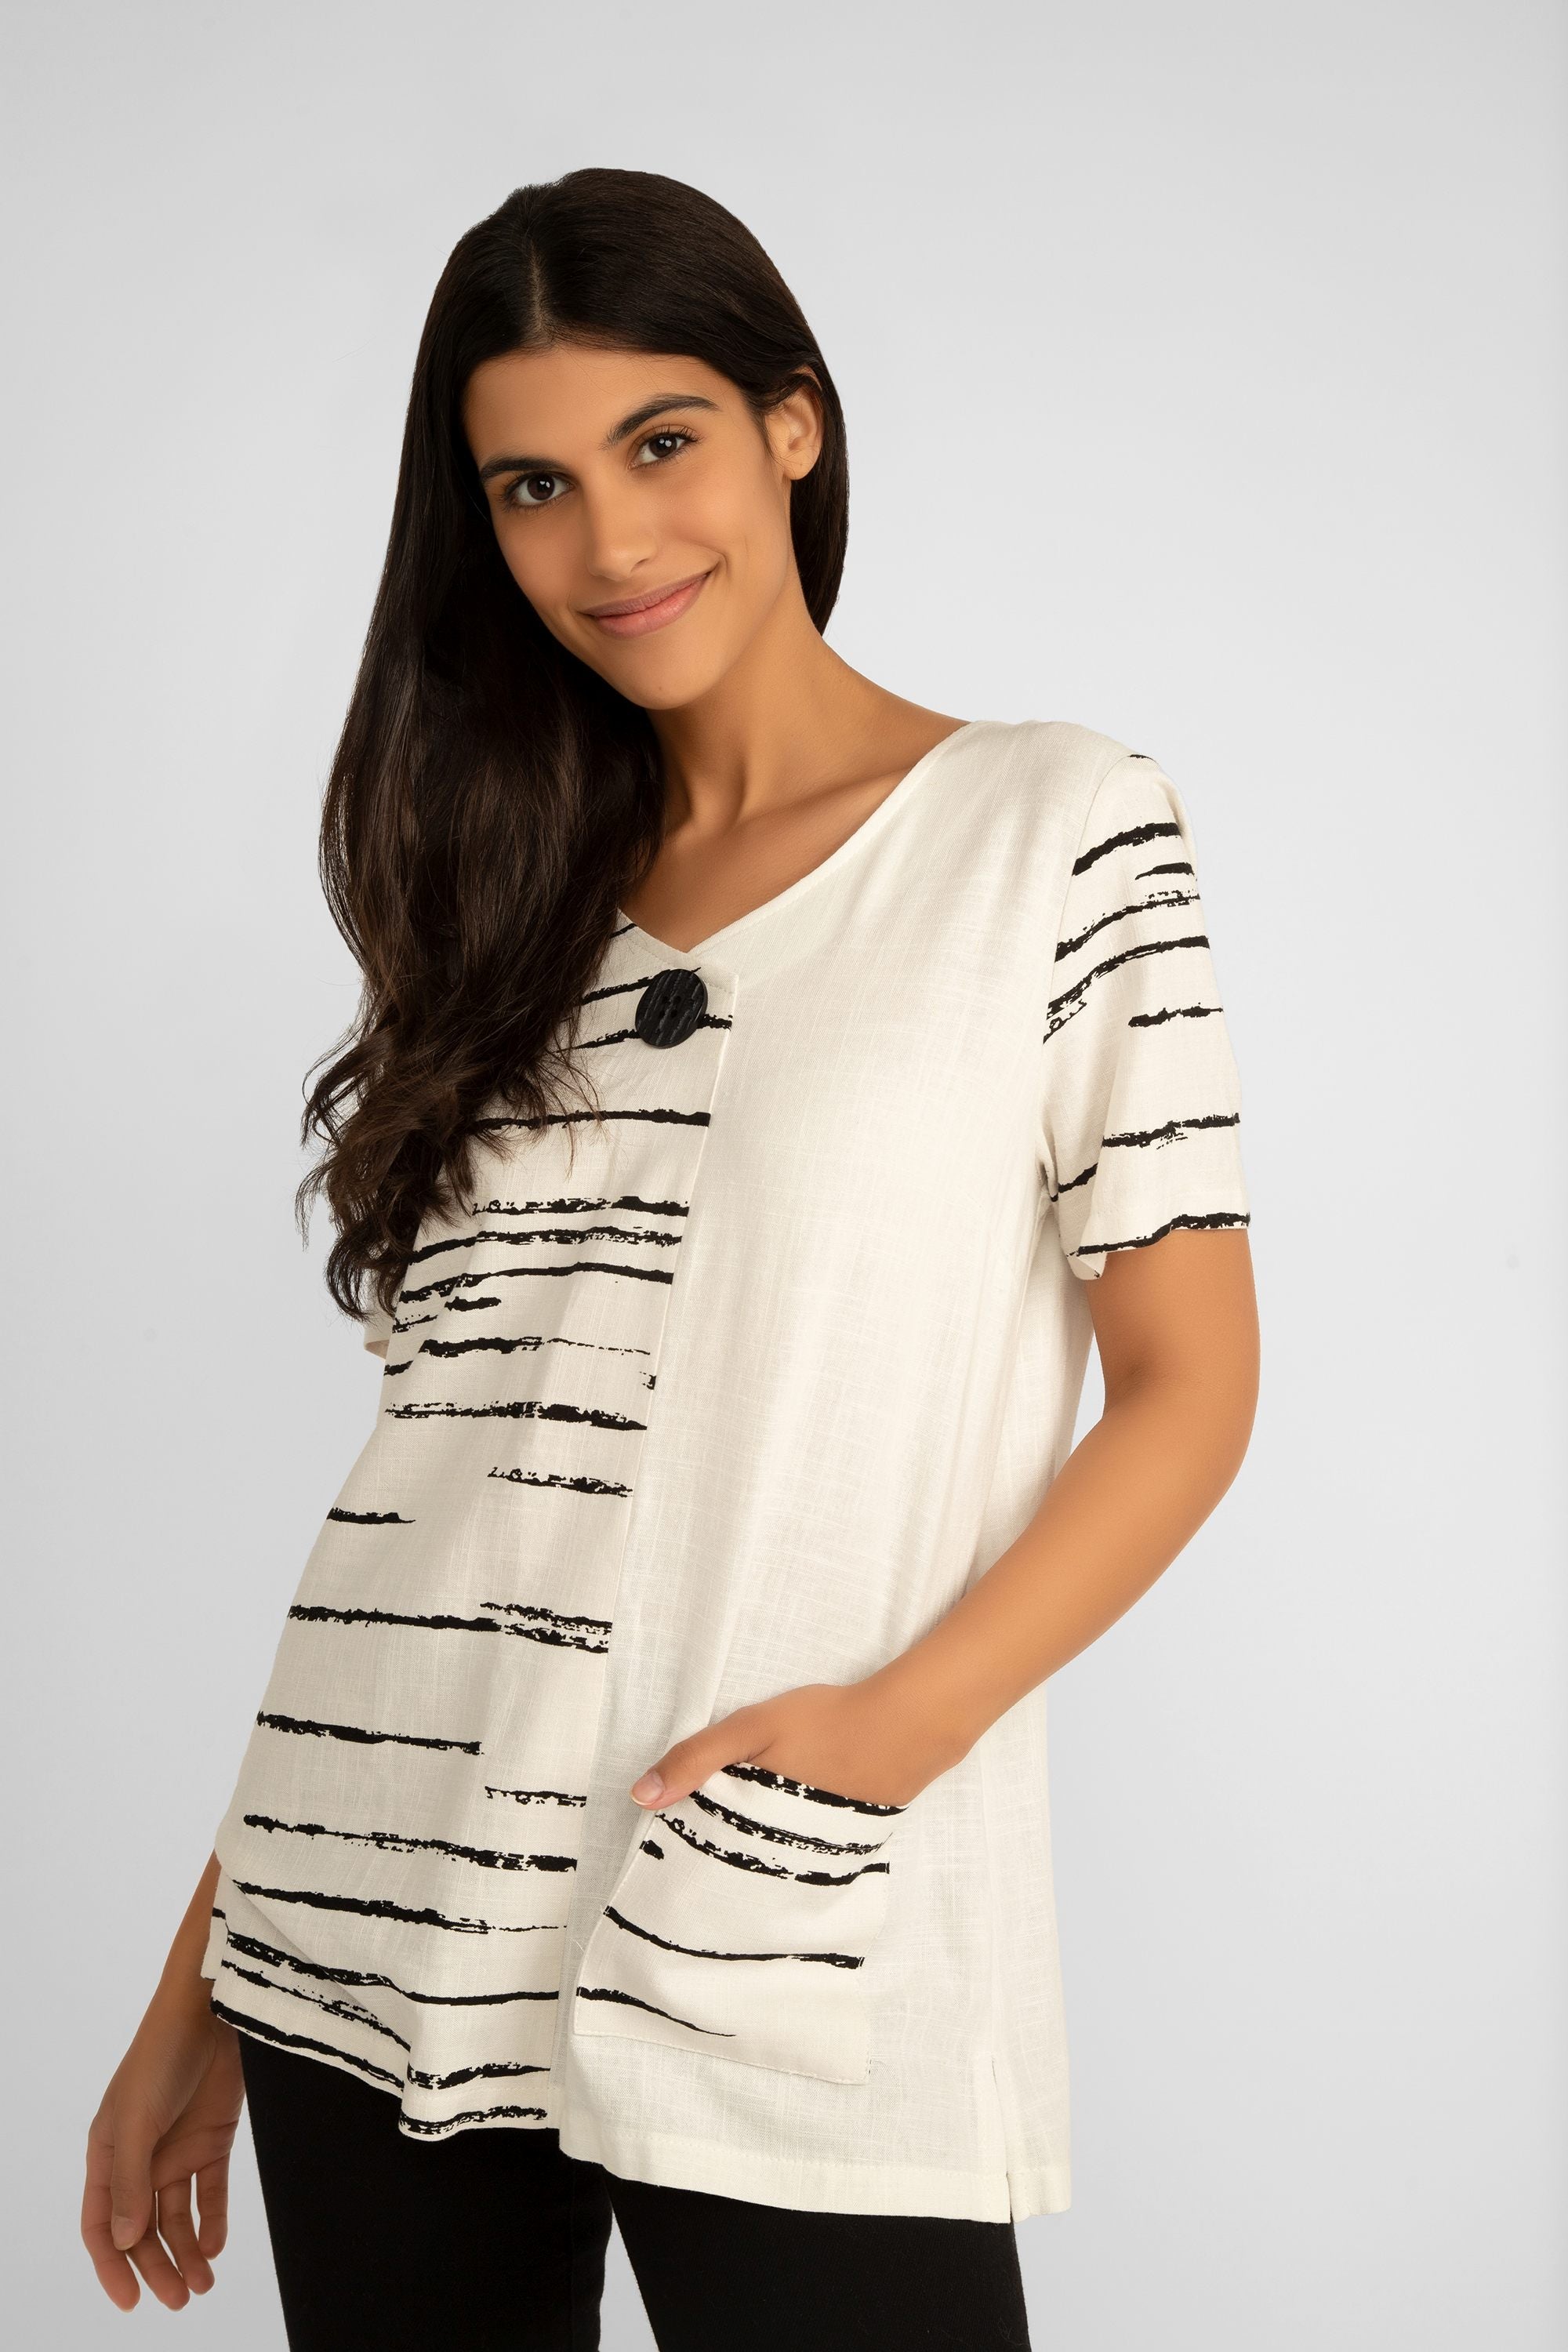 Compli K (33516) Women's Short Sleeve Top With Button V-Neck in White With Black Weathered Lines Print